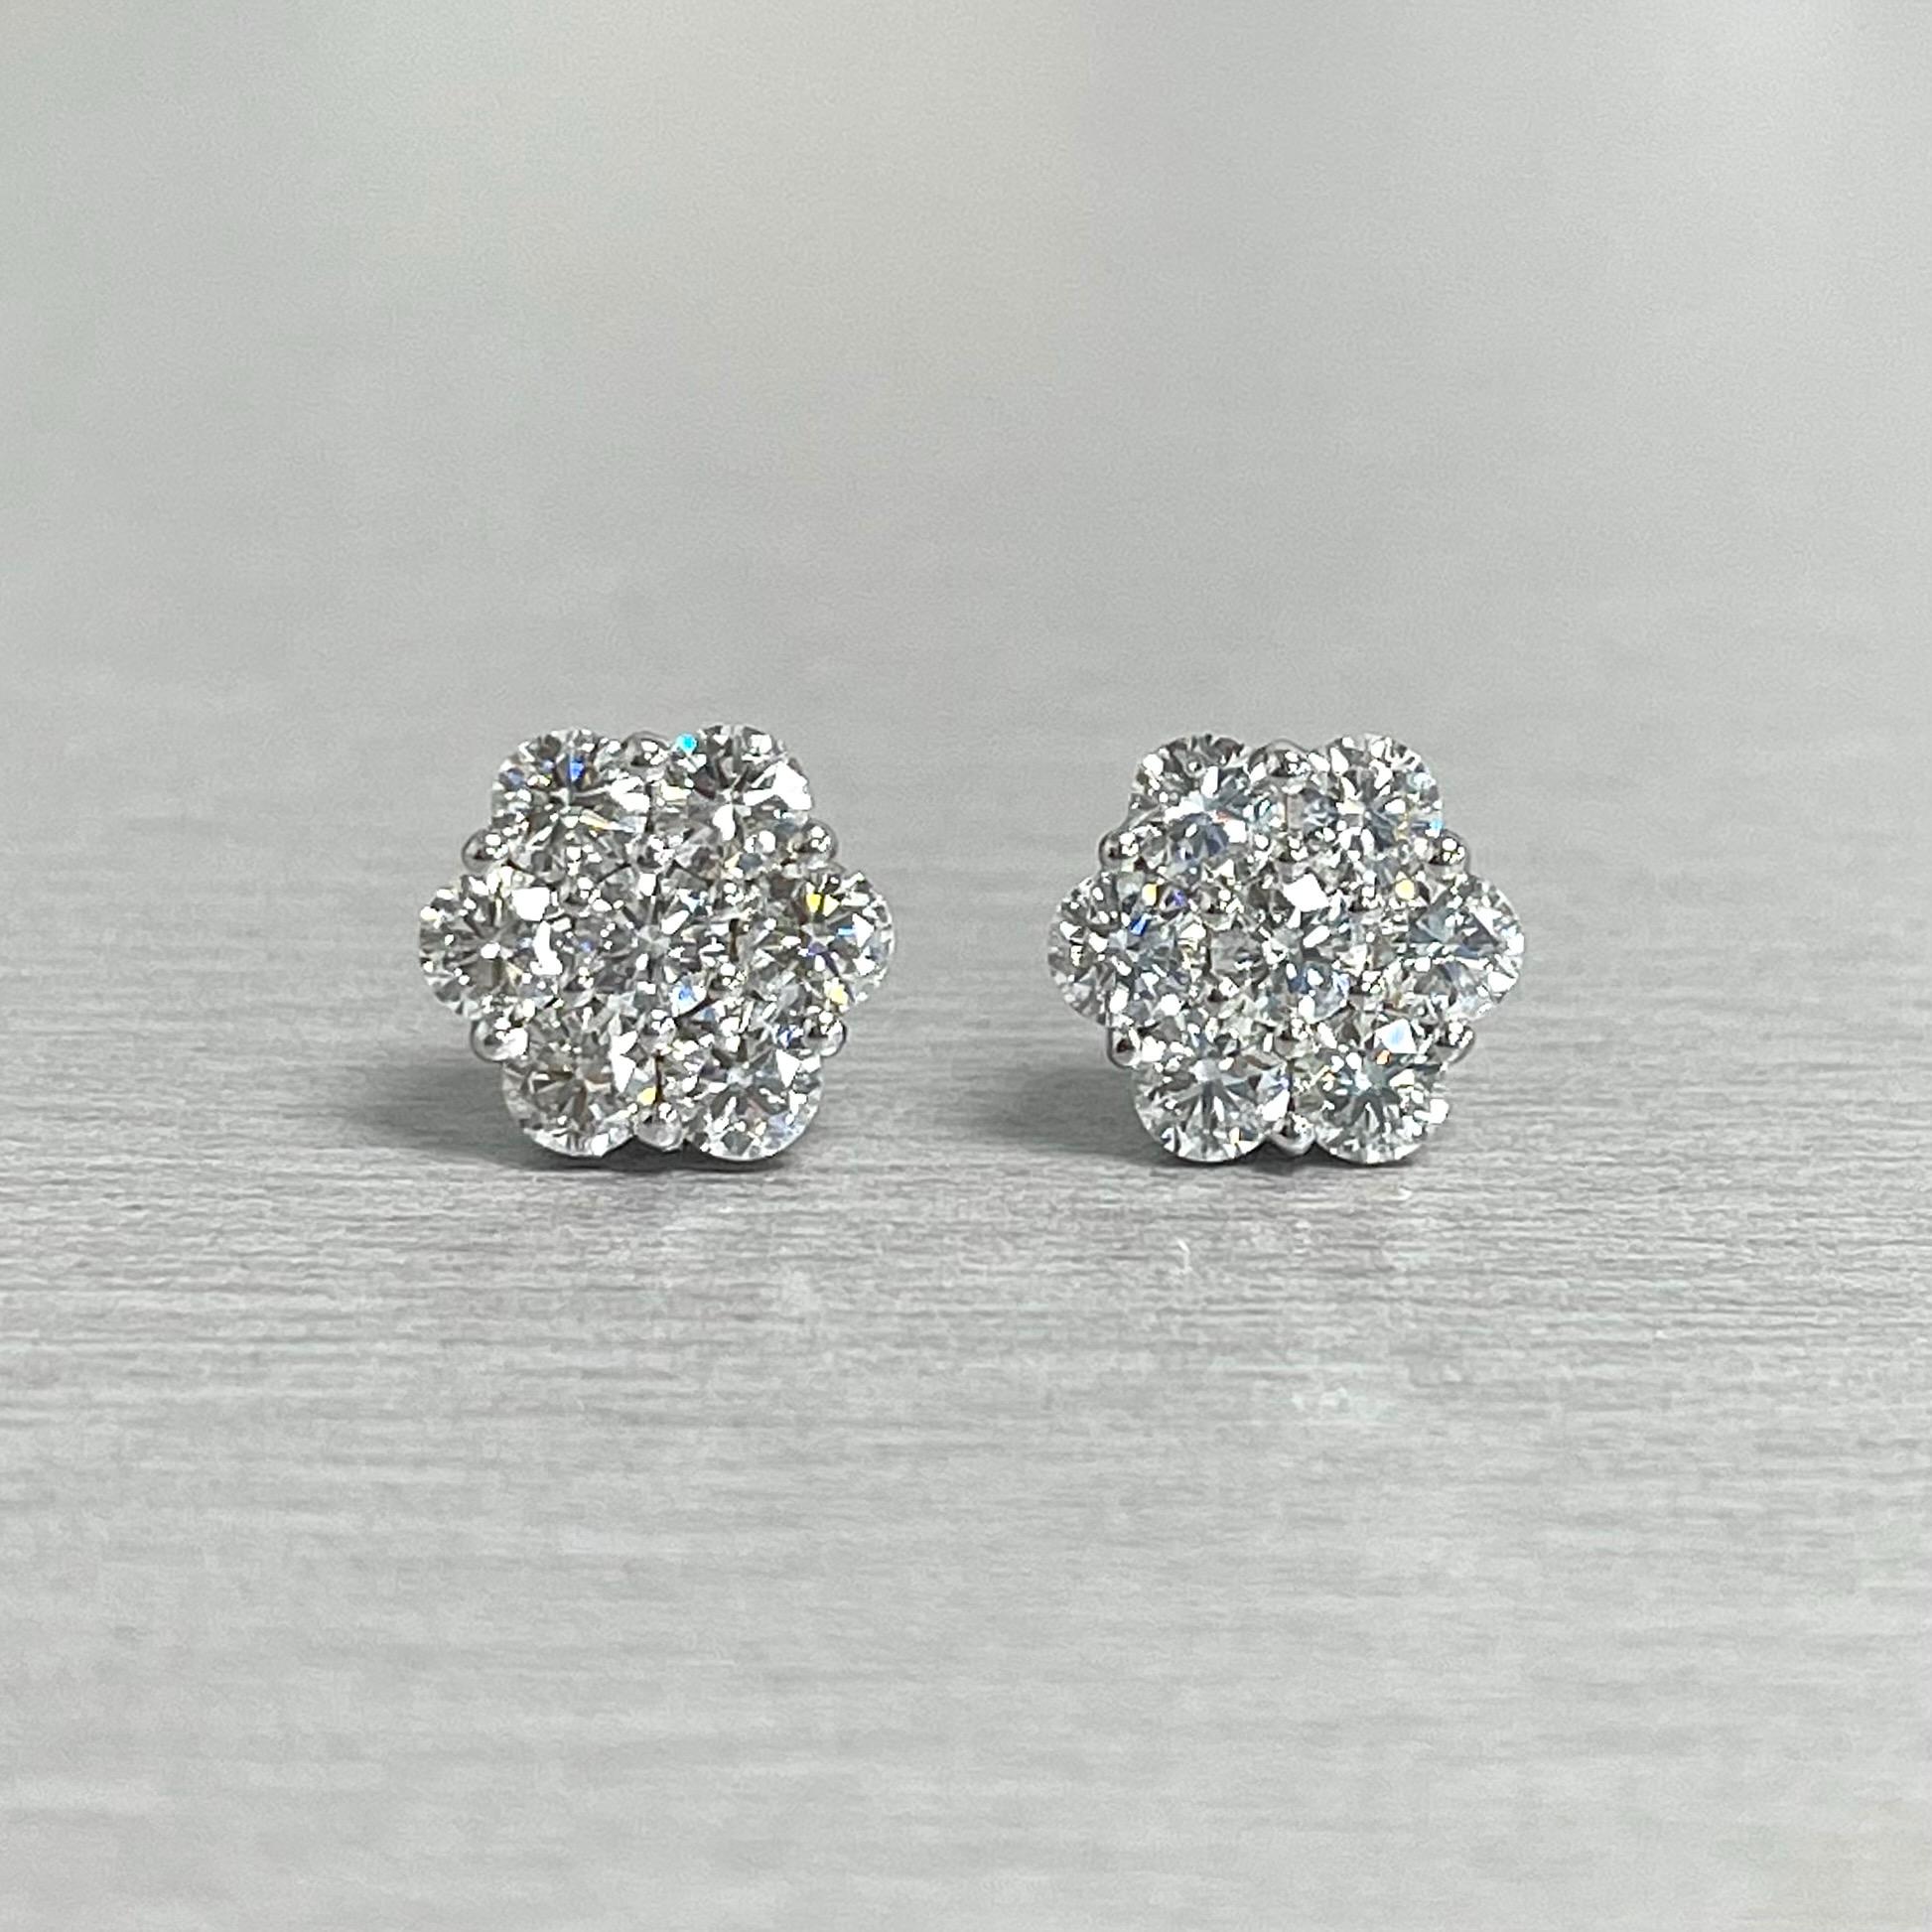 Contemporary Beauvince Flower Cluster Studs 1.42 Carat Diamonds in White Gold